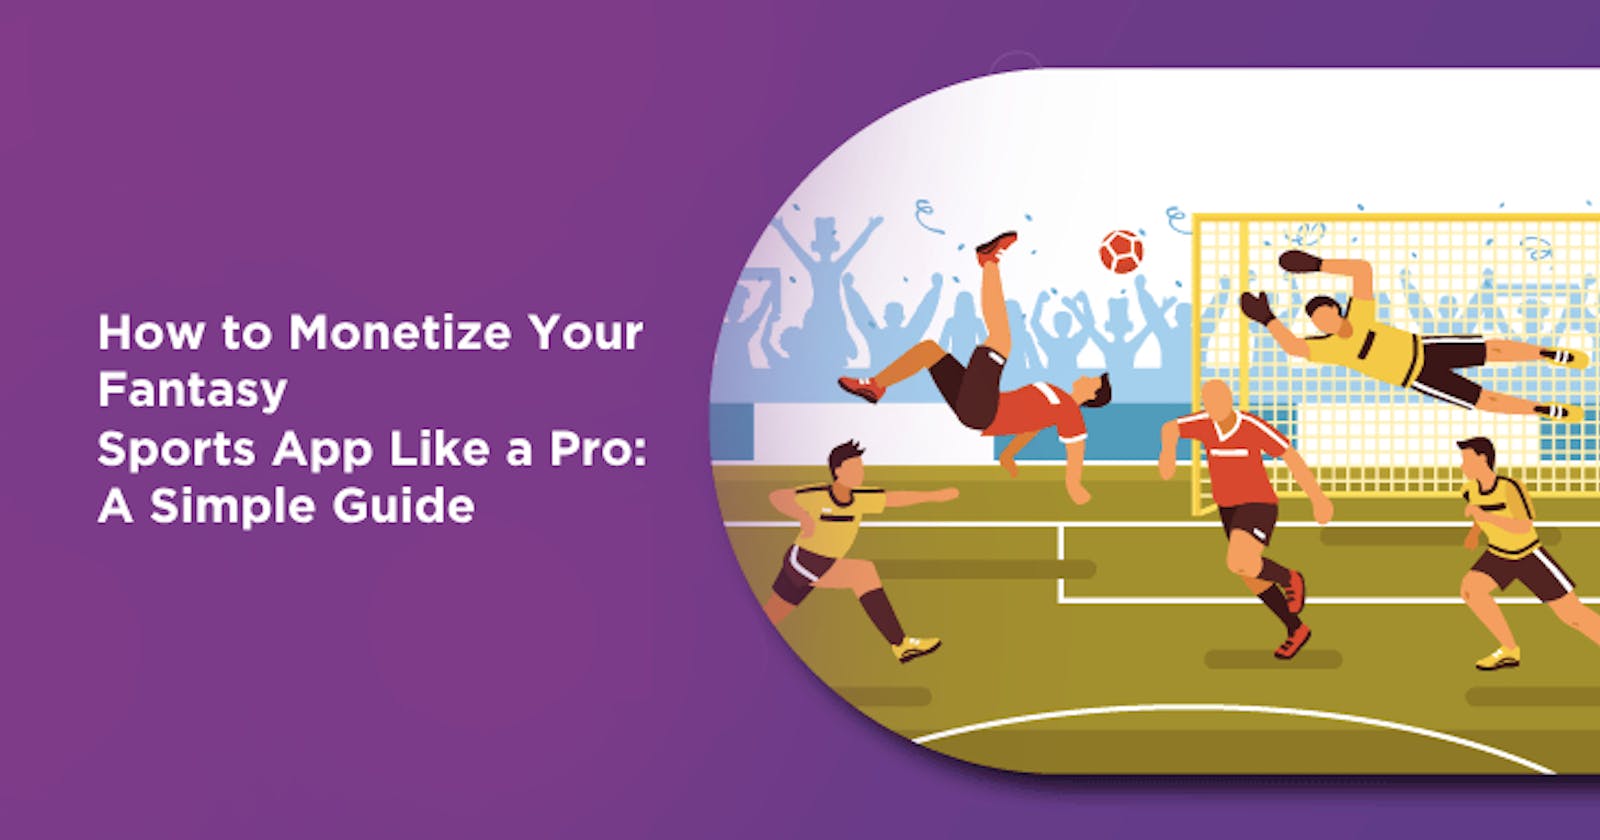 How to Monetize Your Fantasy Sports App Like a Pro: A Simple Guide